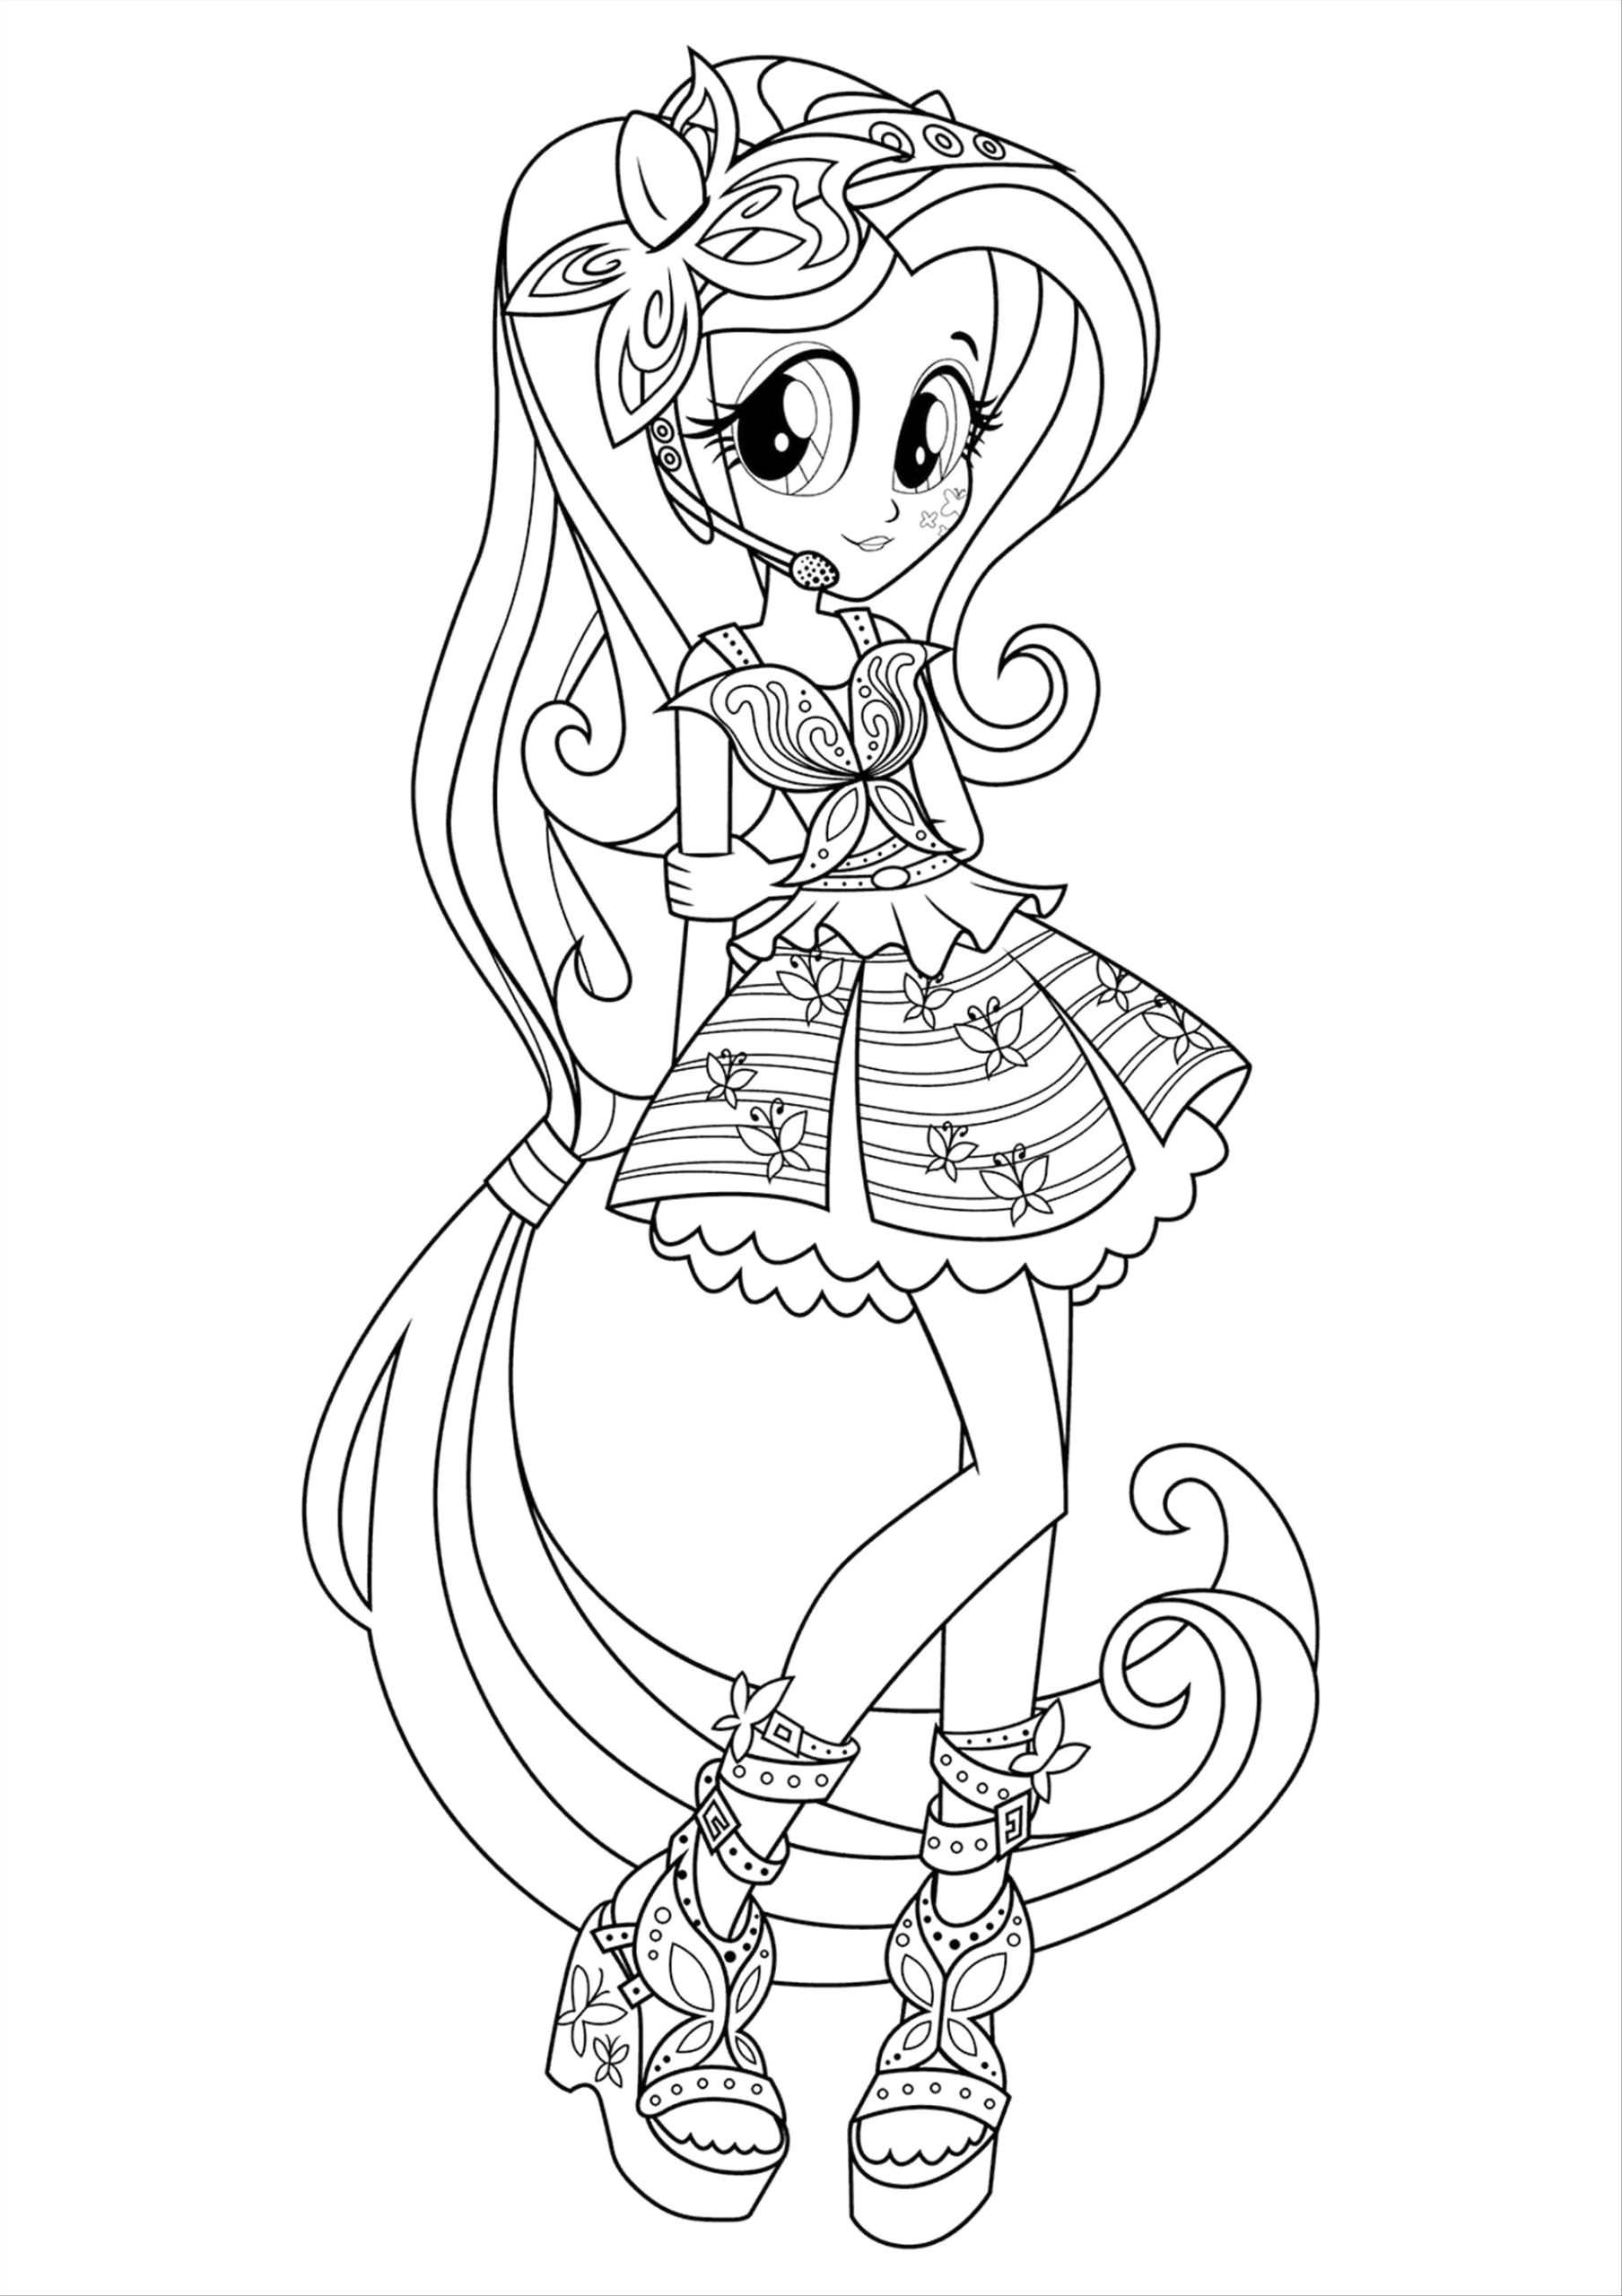 Sunset Shimmer Coloring Pages - Coloring Home